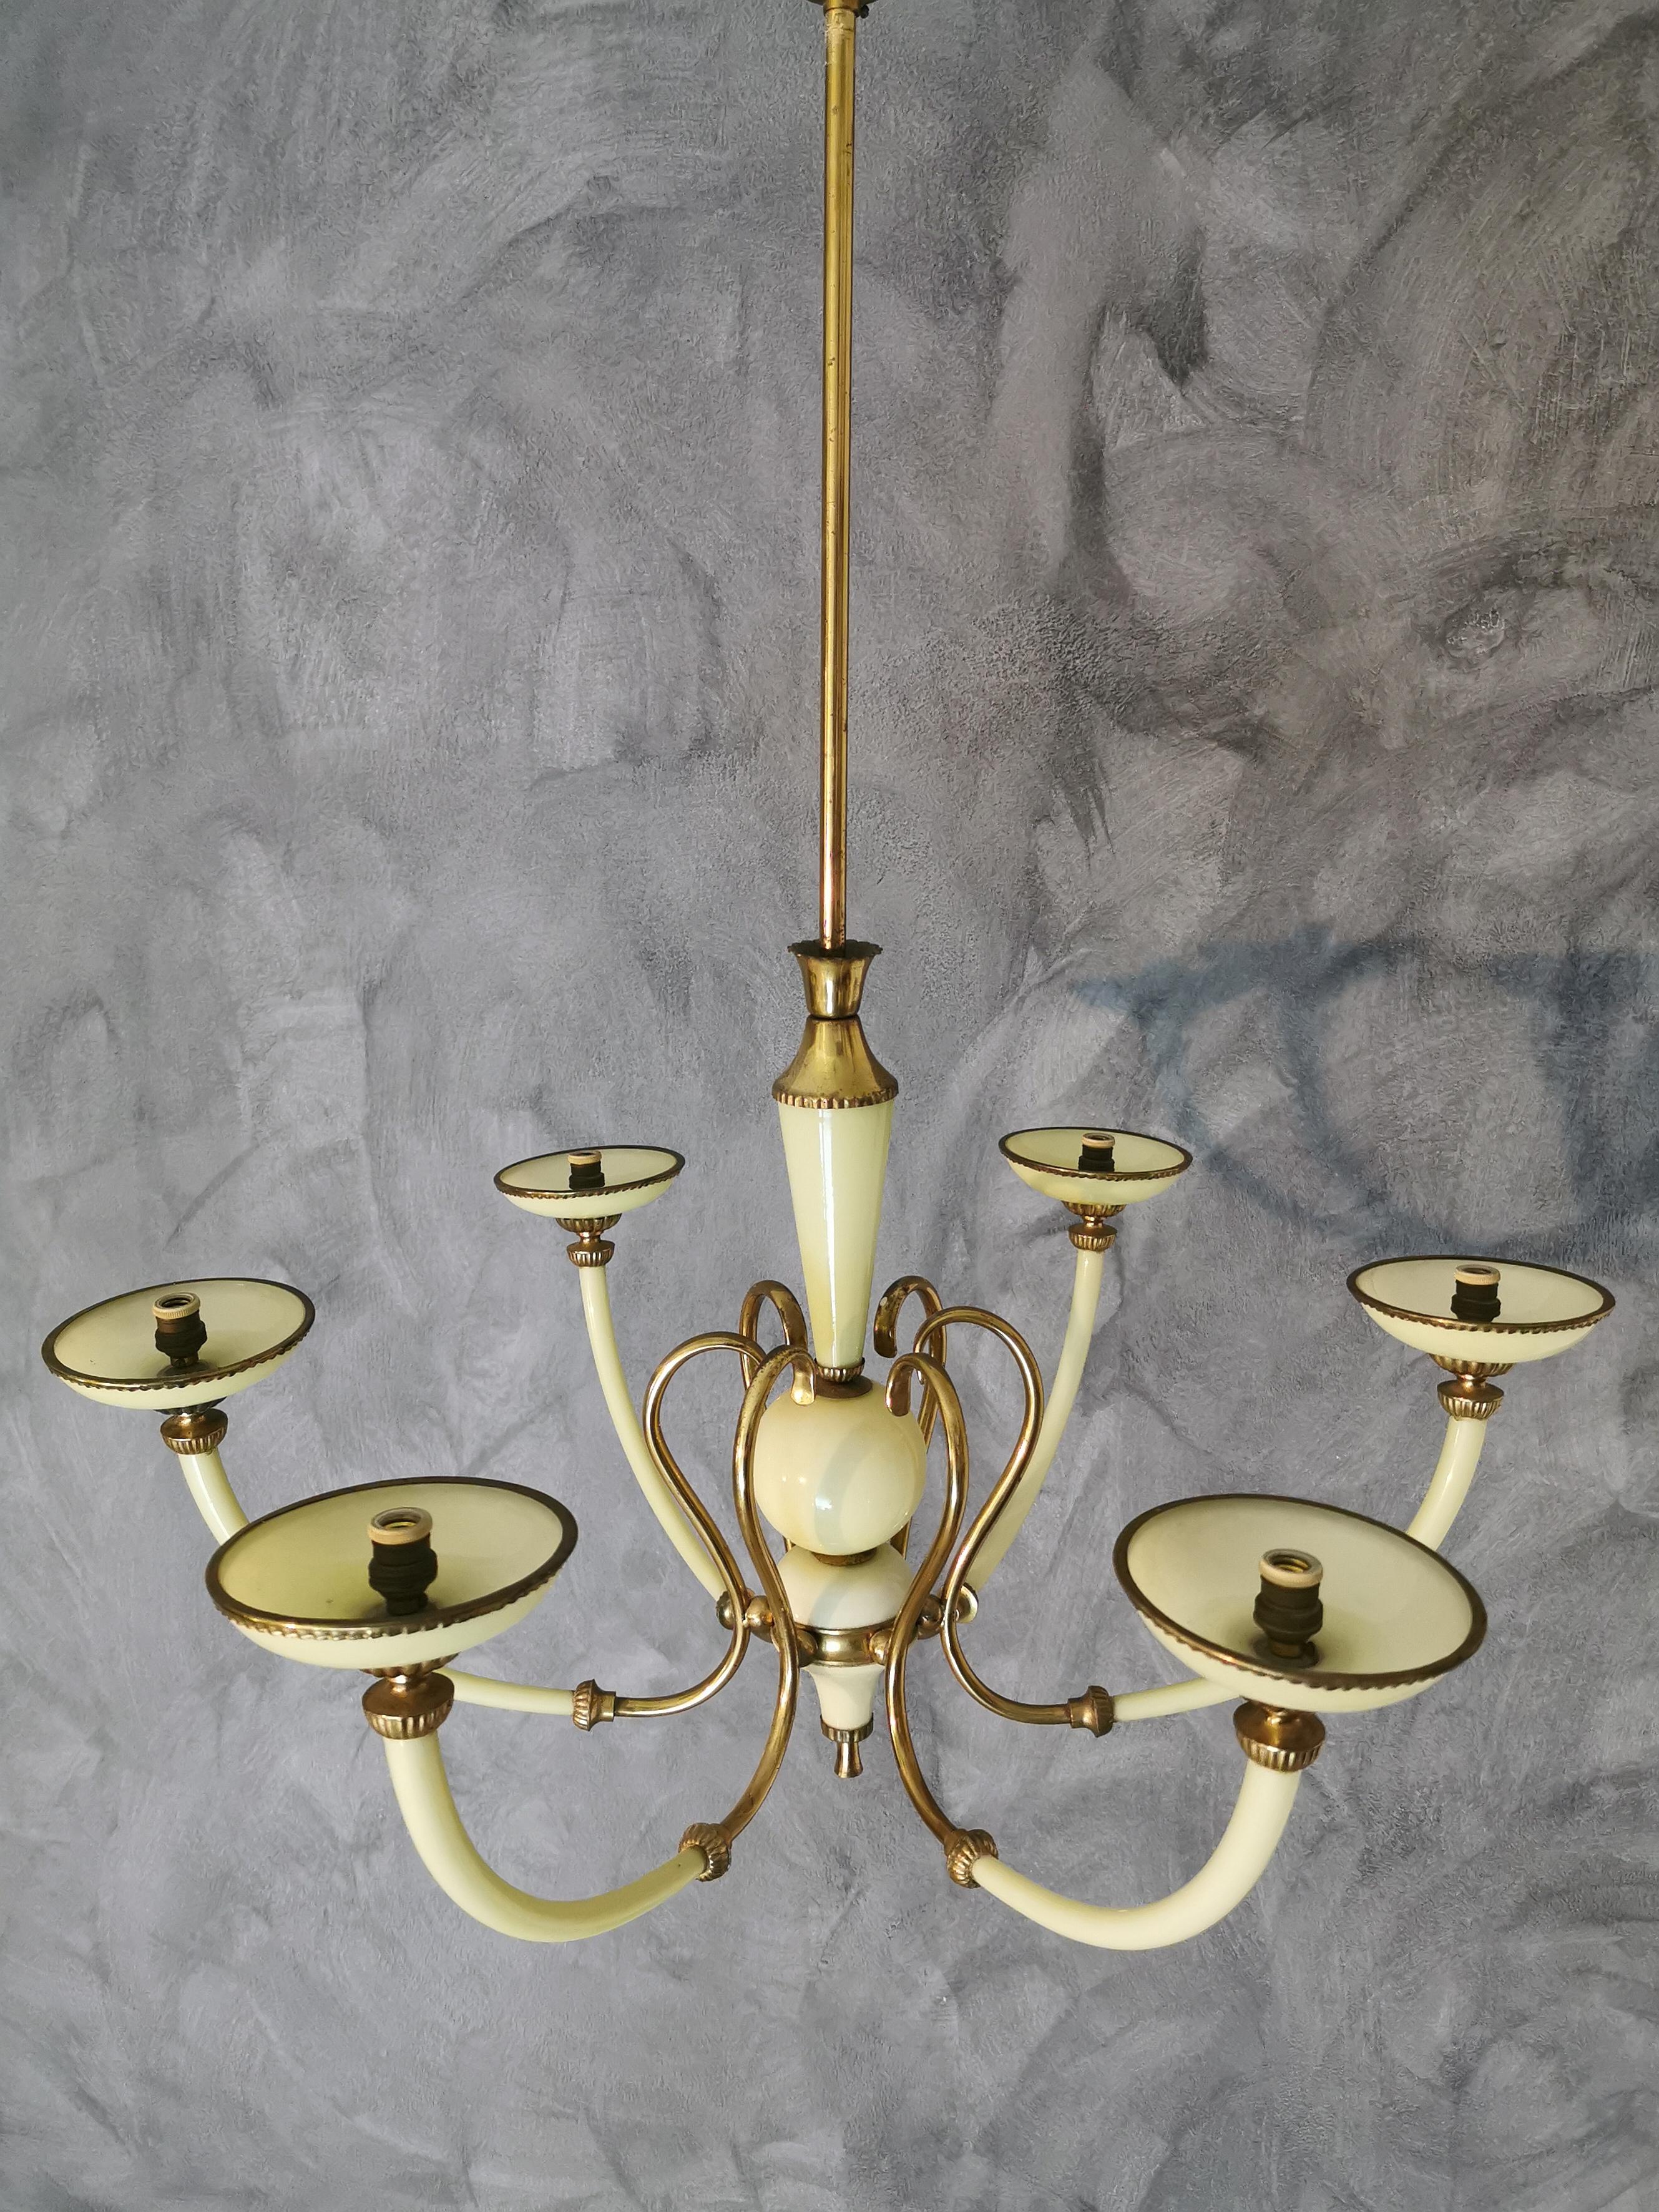 Chandelier by unknown designer with six arms, in light green layered Murano glass with brass trimmings. 6 lights, from the 1950s.